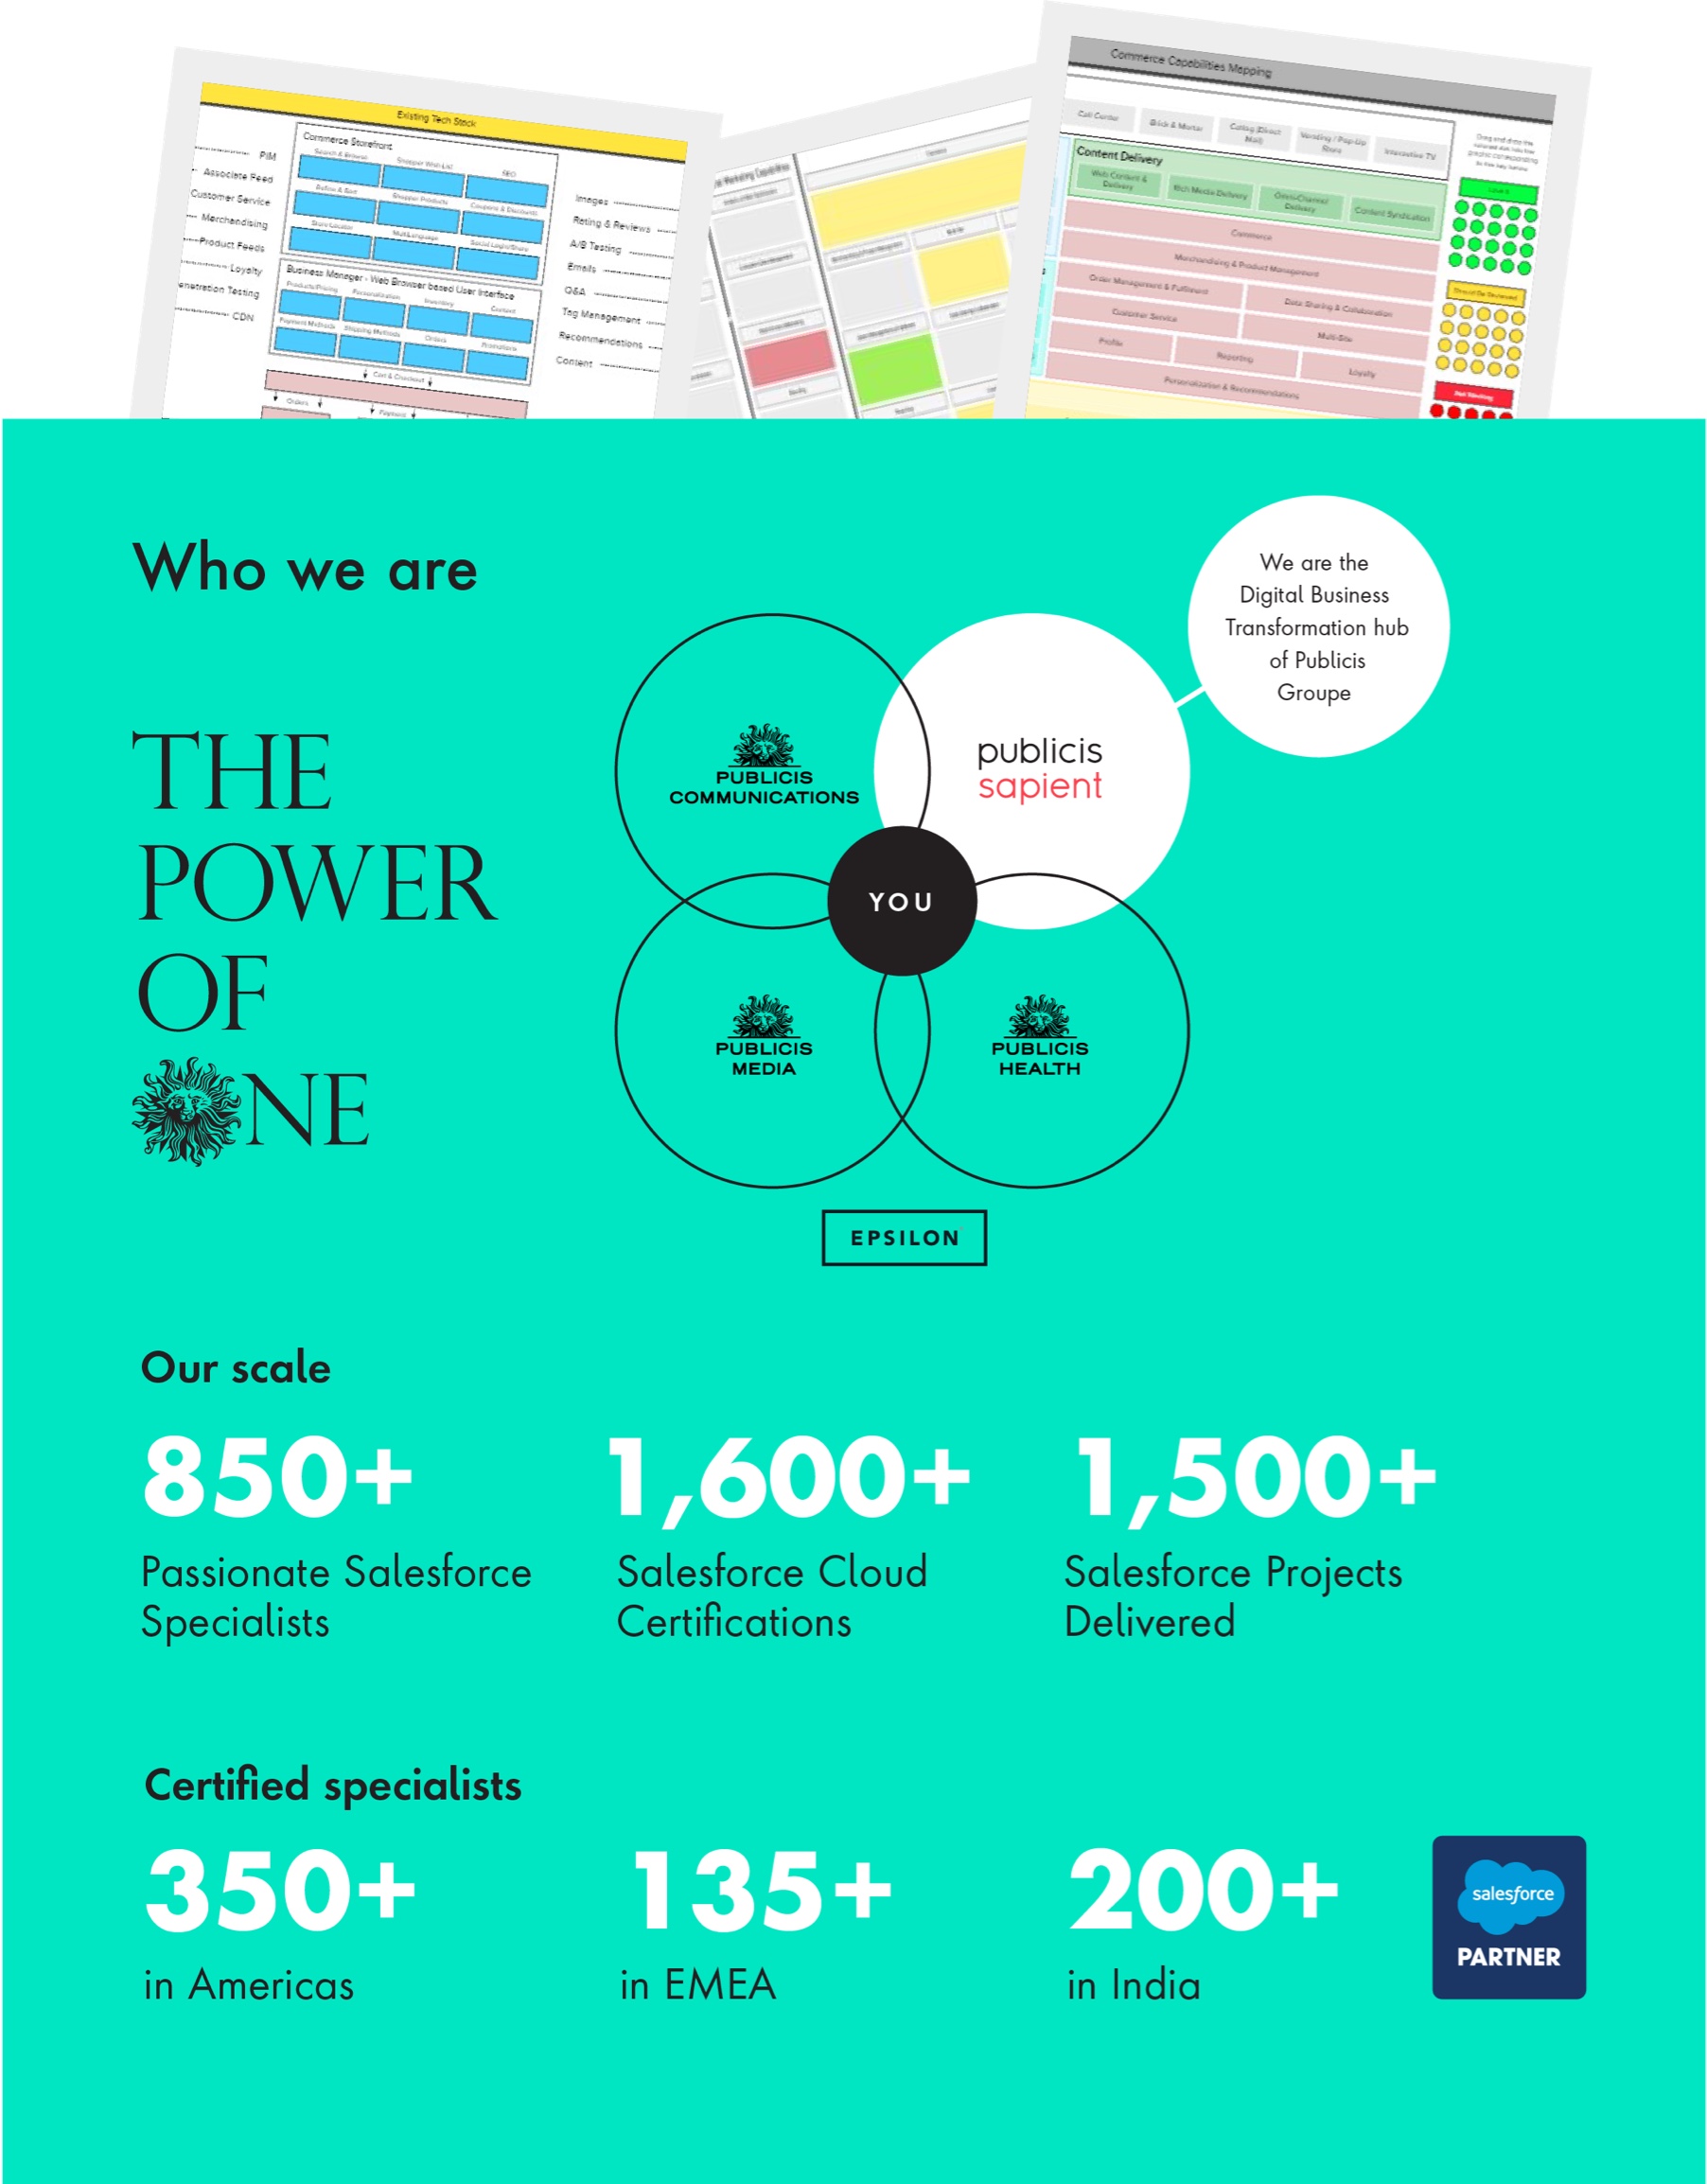 Our clients benefit from the Power of One, where Publicis Sapient intersects with other Publicis agencies, with Epsilon data underpinning it all. Publicis Sapient is proud to have more than 700 Salesforce specialists worldwide.